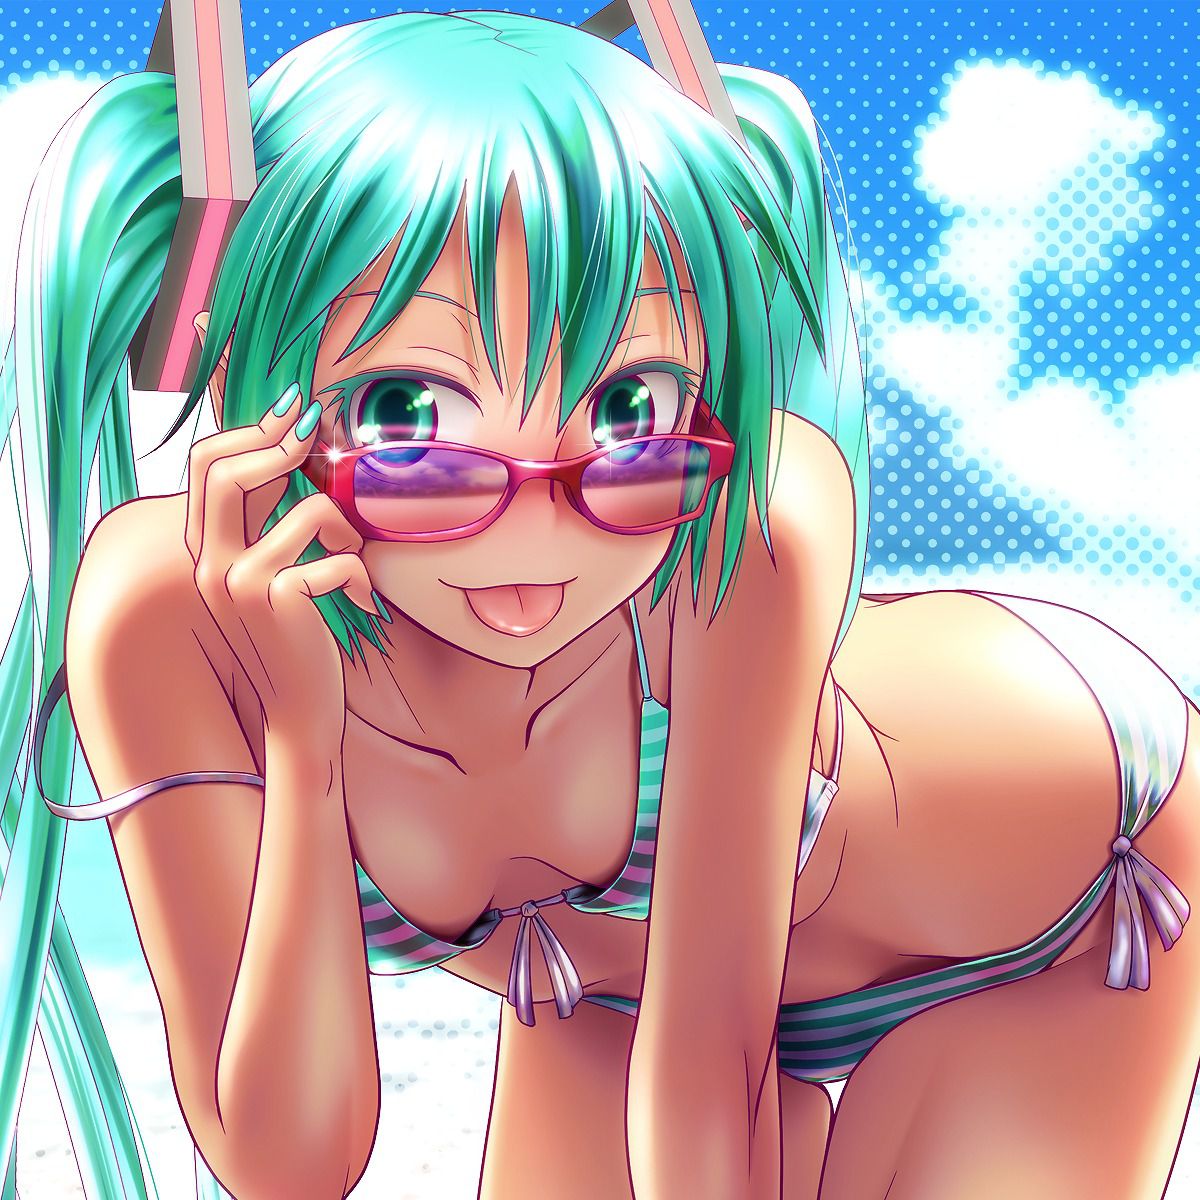 Secondary images of the girls put on glasses part 1-45 [erotic and non-erotic] 27